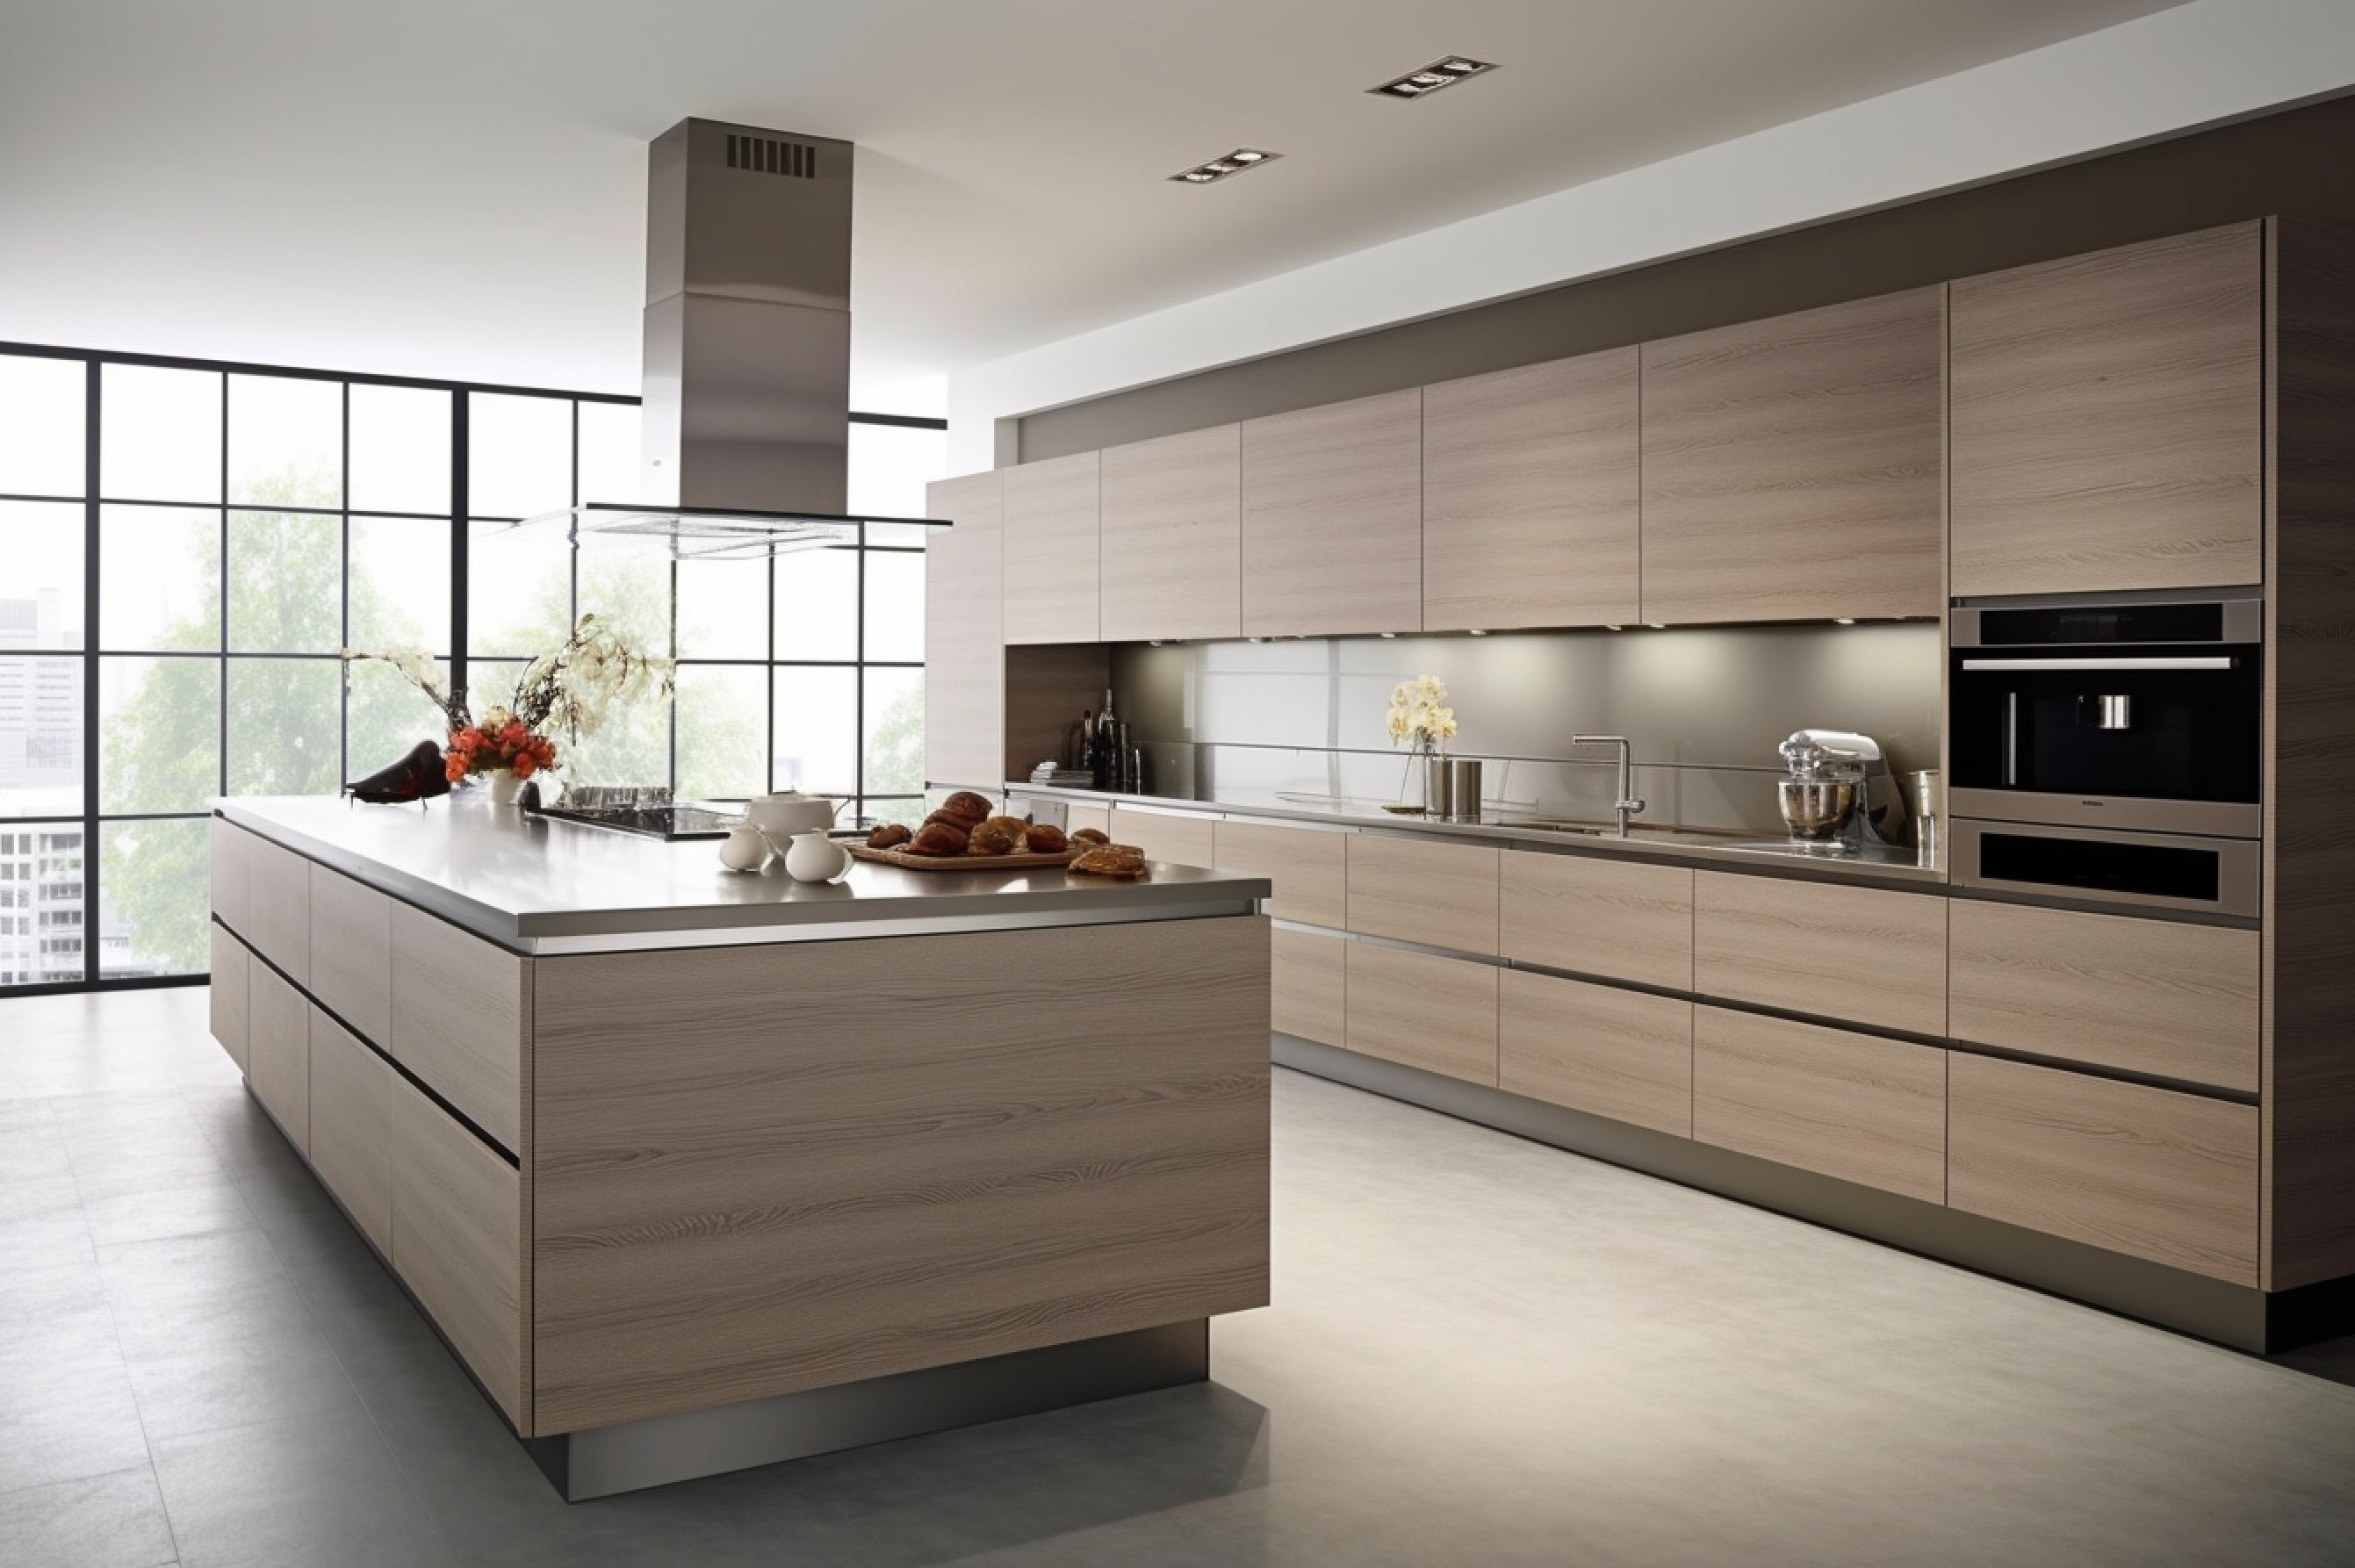 Picture showcasing a minimalist kitchen design with cool sepia cabinets contrasted by silver grey appliances.